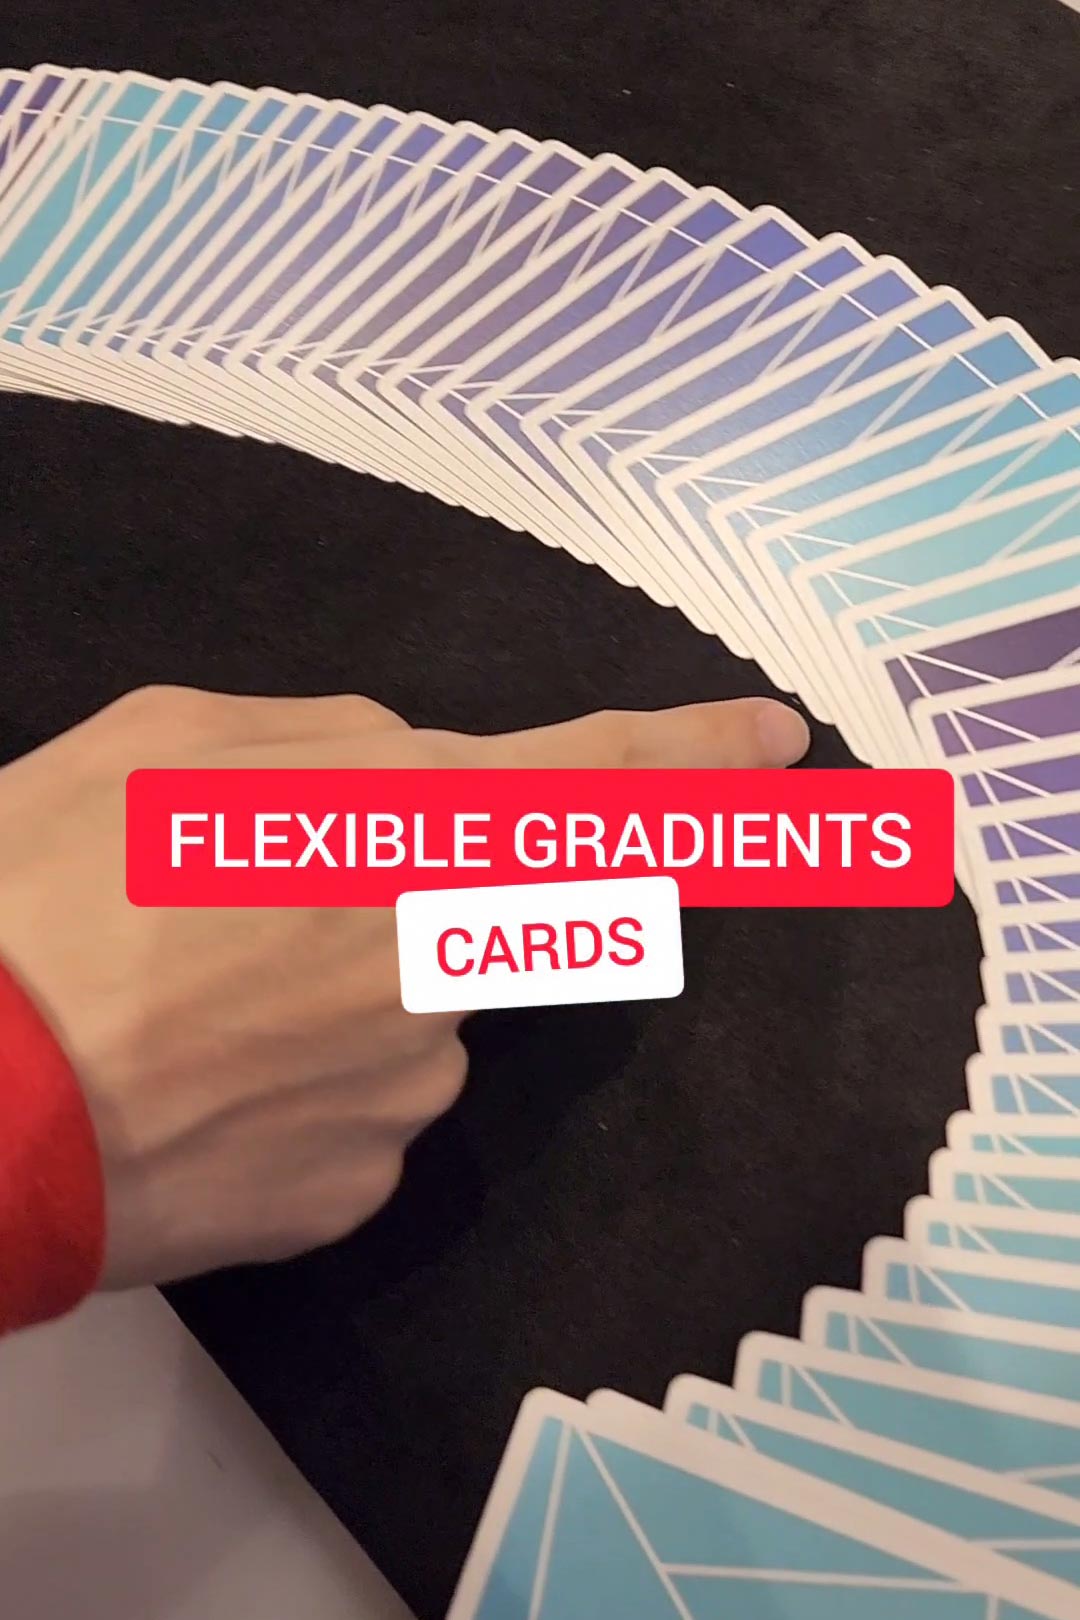 Flexible Gradients Playing Cards!